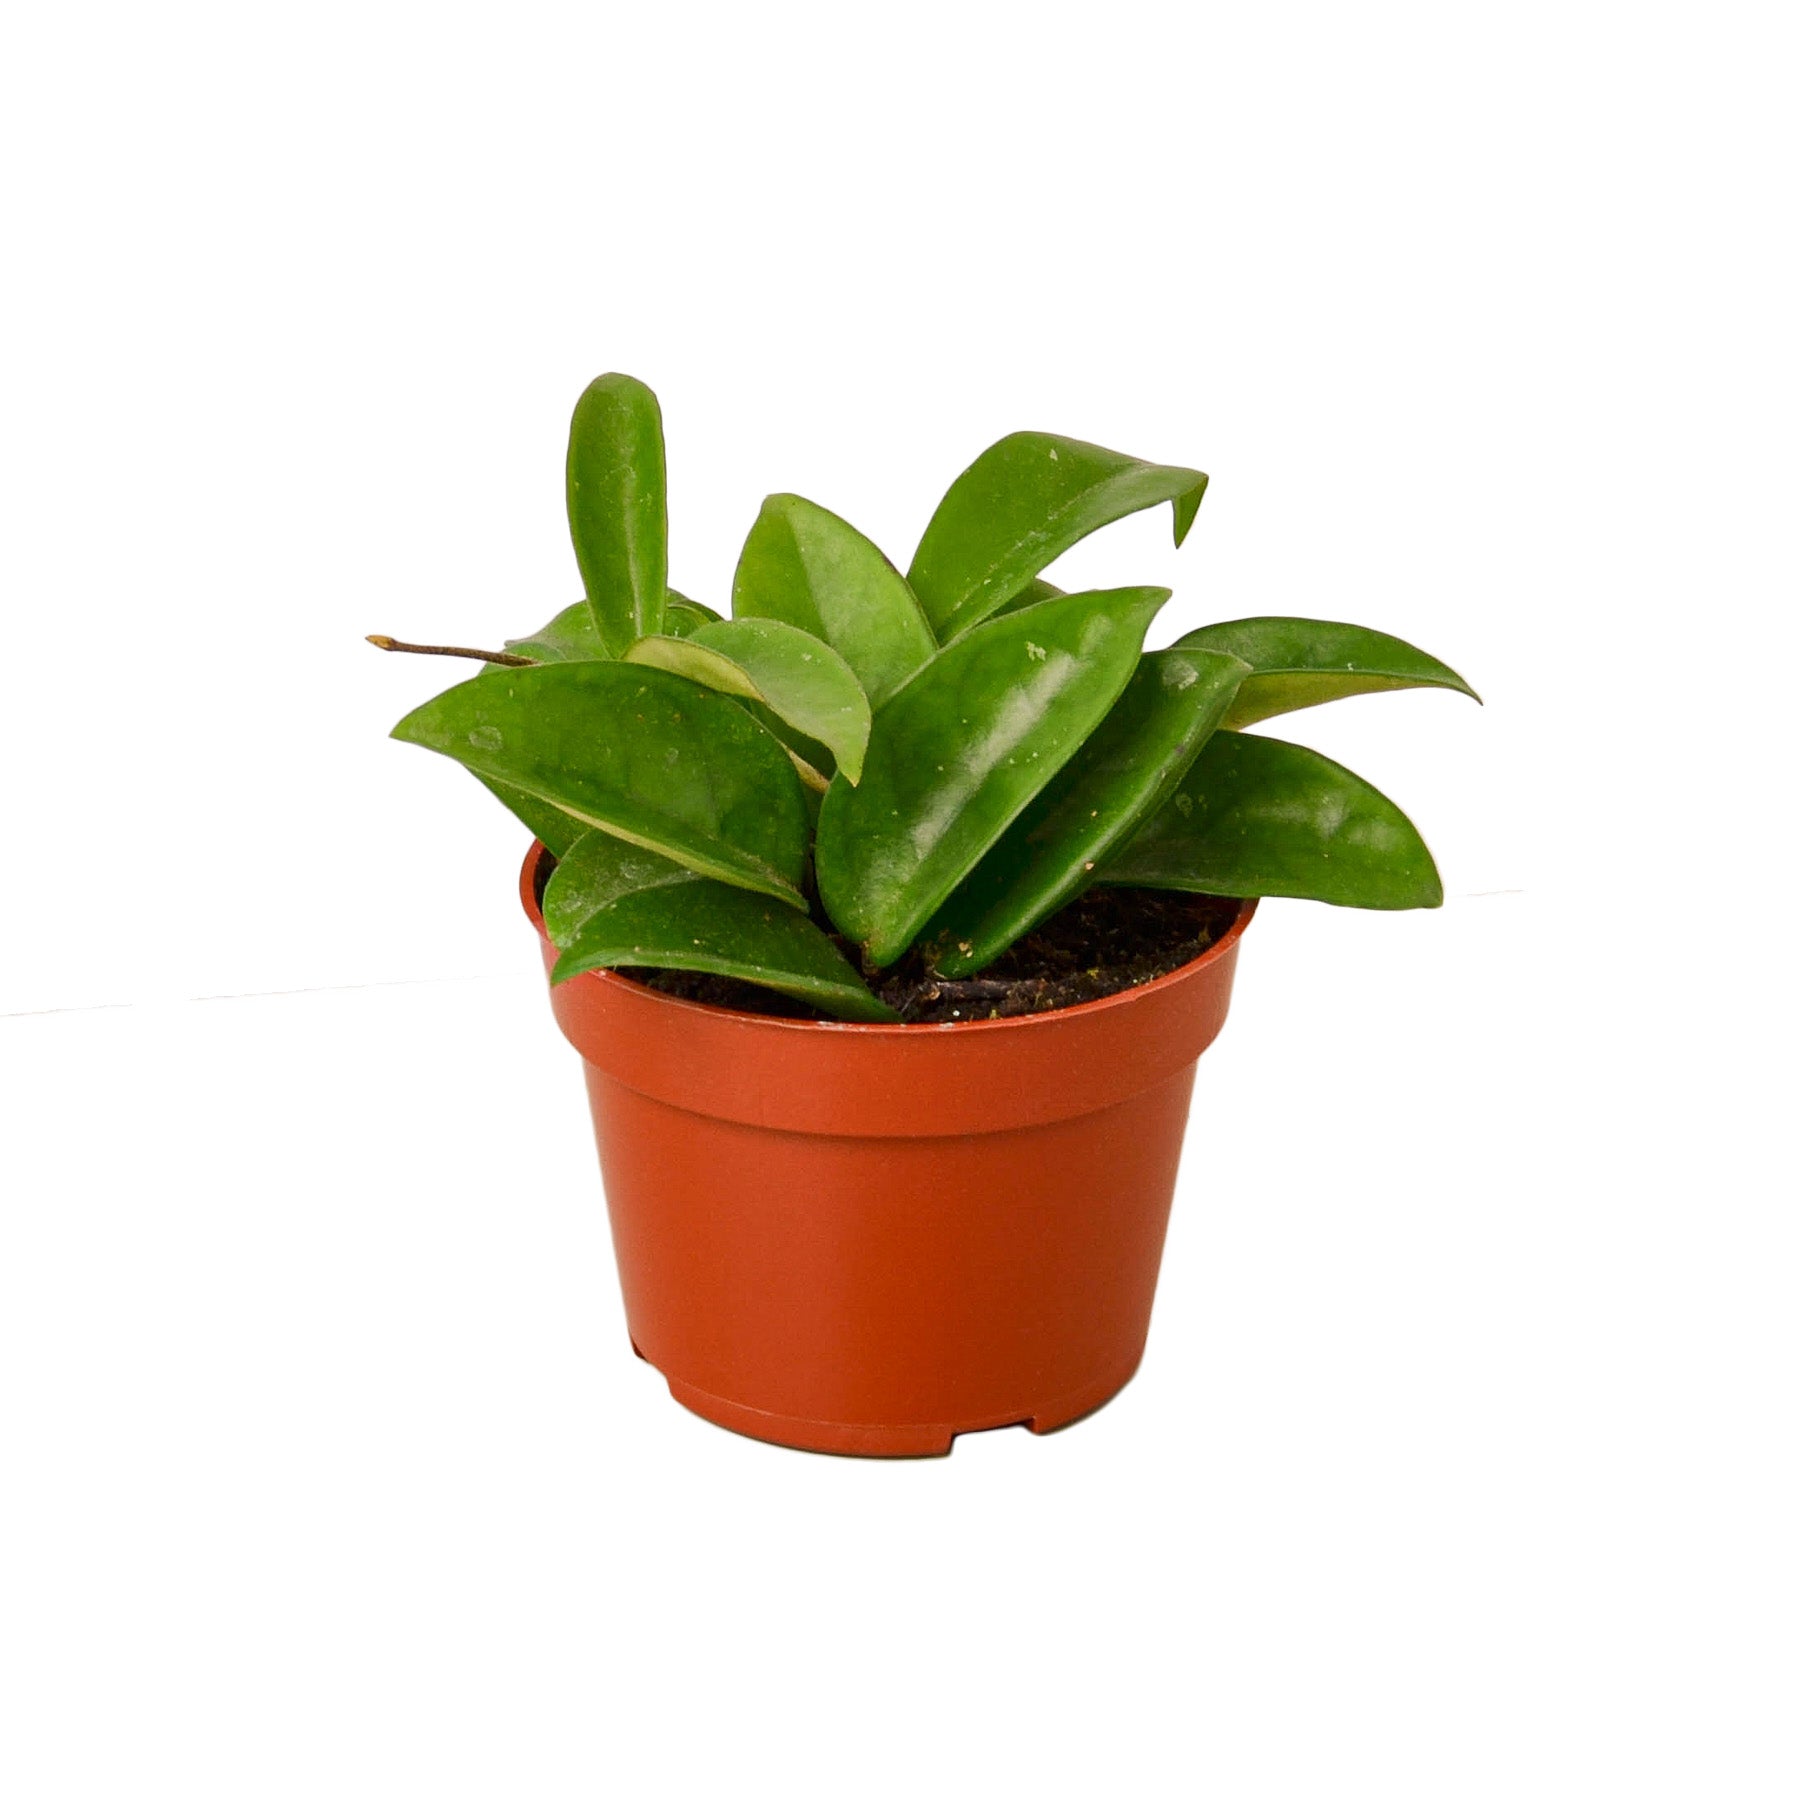 A small plant in a red pot on a white background, available at the best garden center near me.